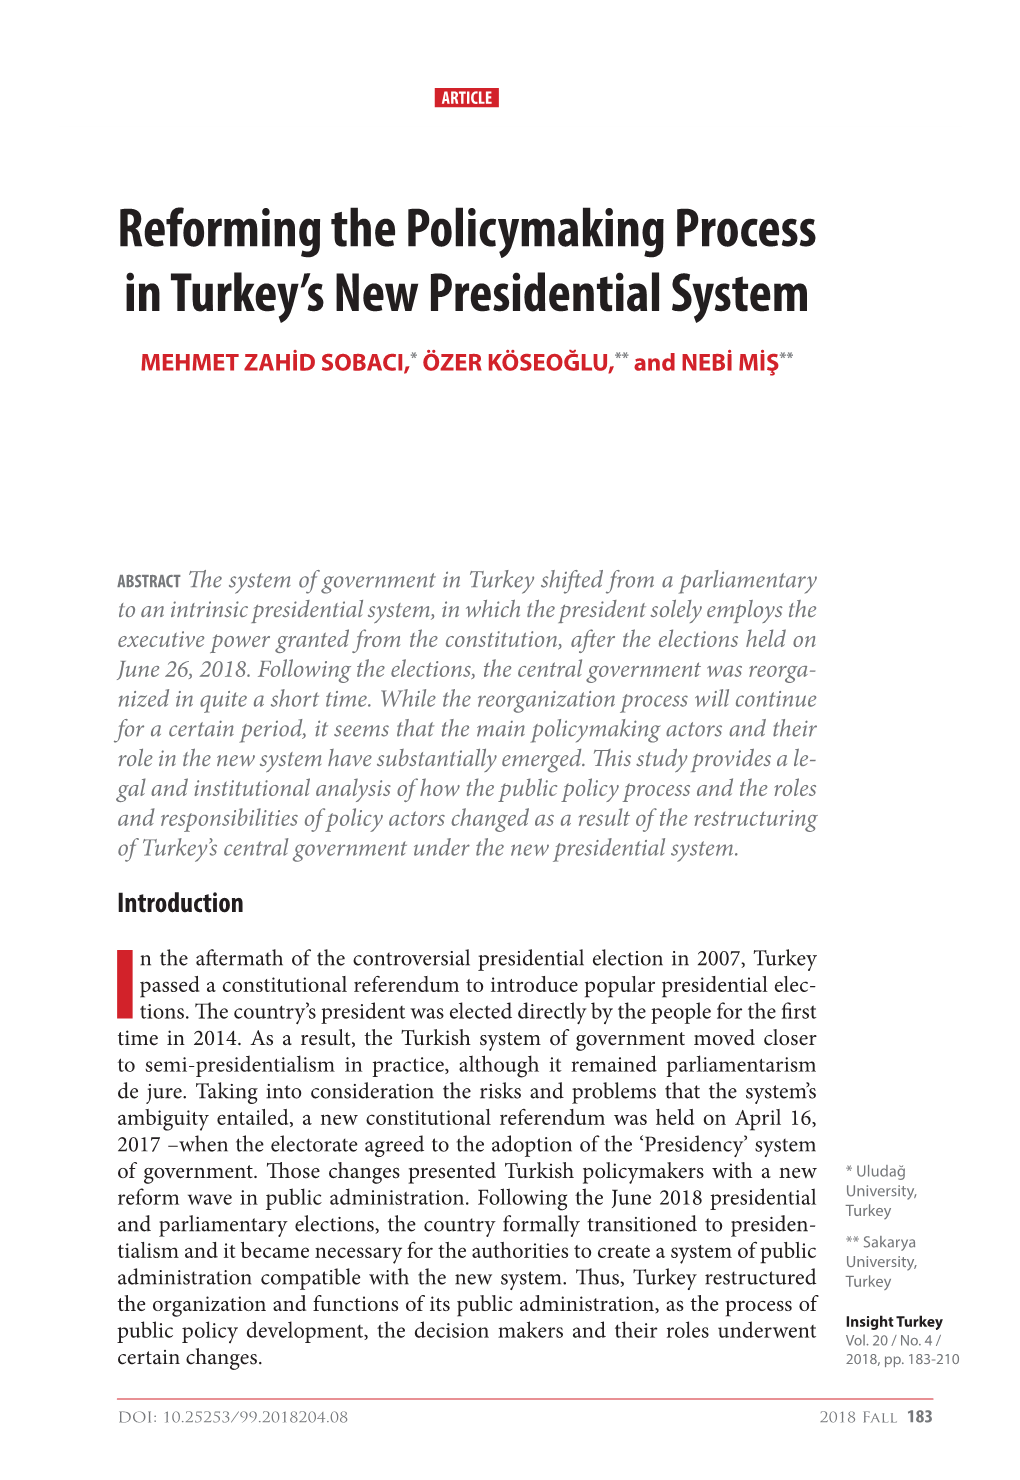 Reforming the Policymaking Process in Turkey's New Presidential System